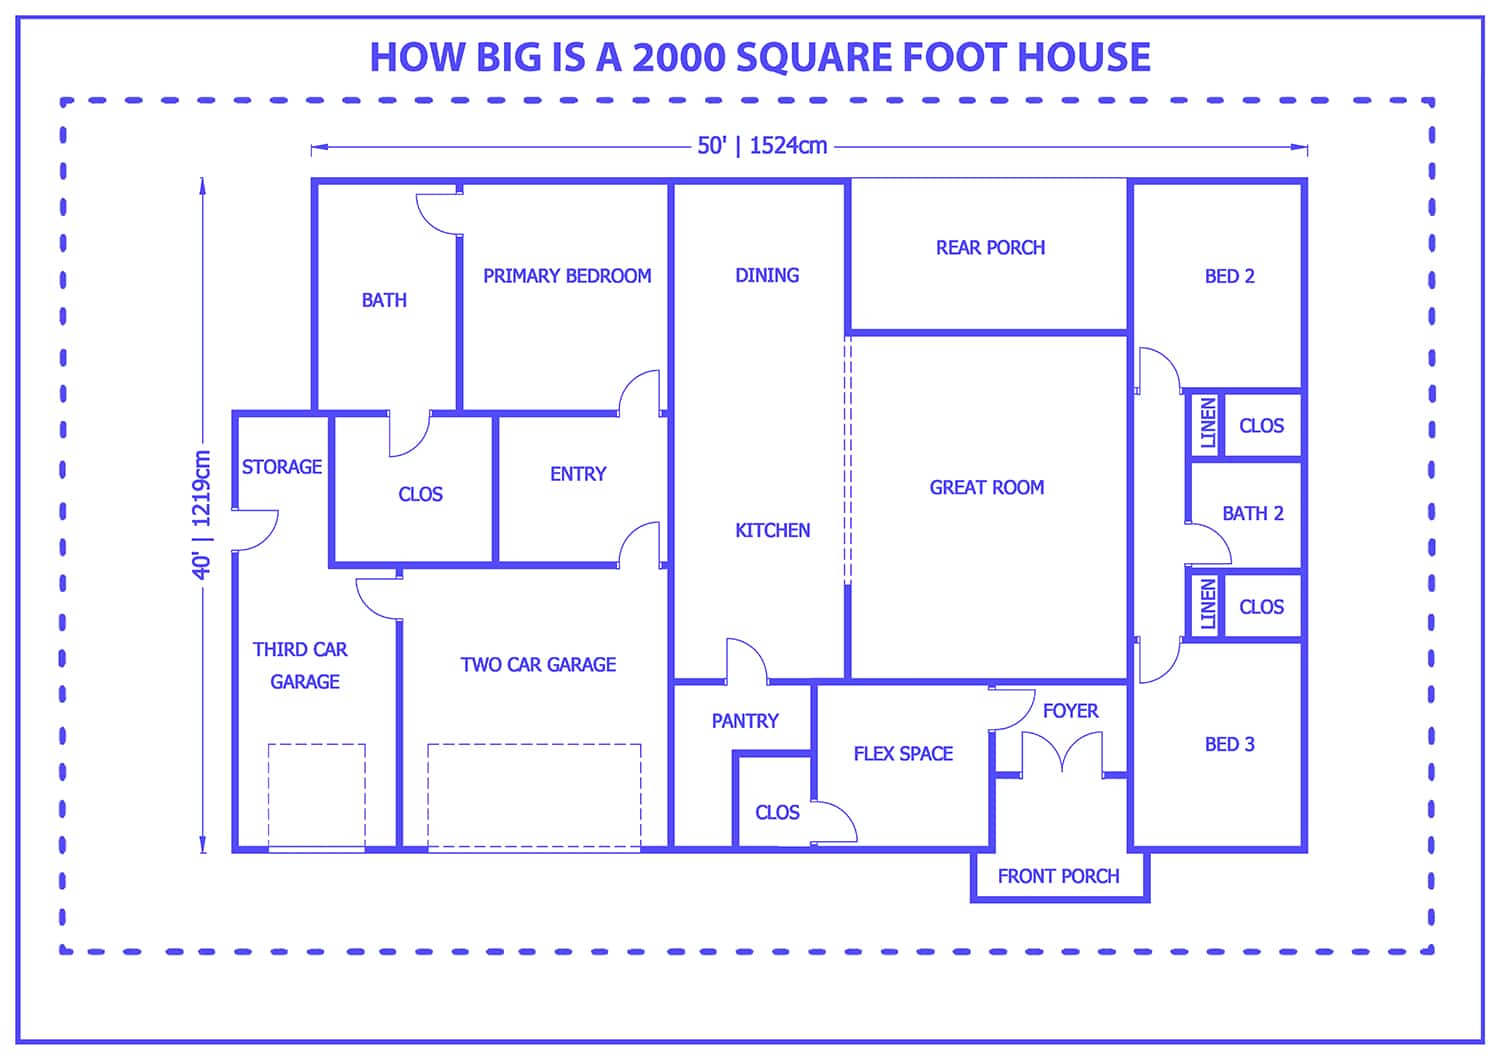 How big is a 2000 square foot house?